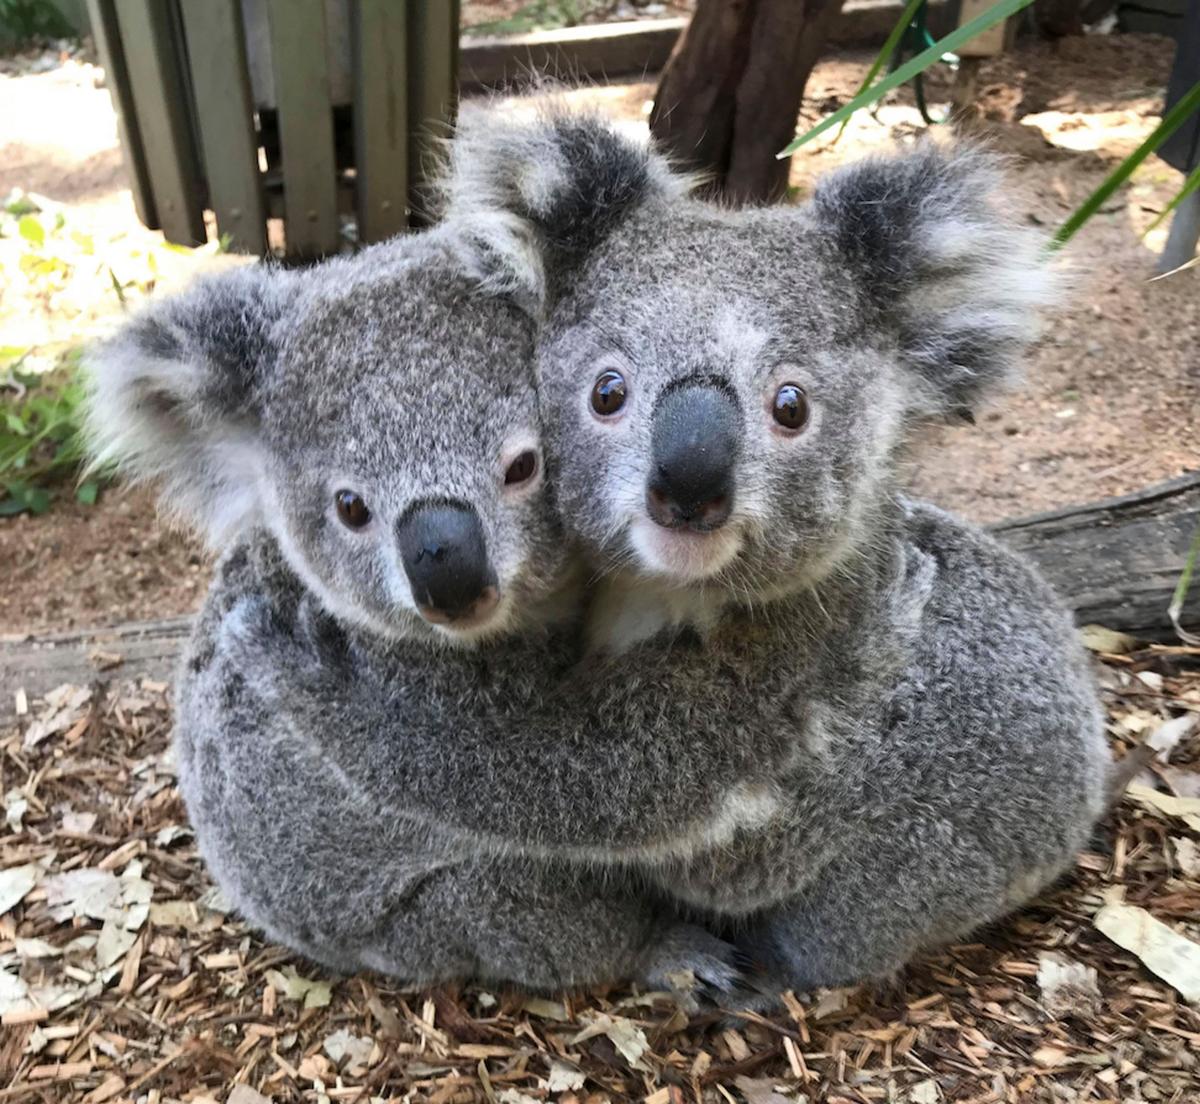 The heartwarming snaps show koalas getting together for some good old-fashioned cuddle time. (Caters News)